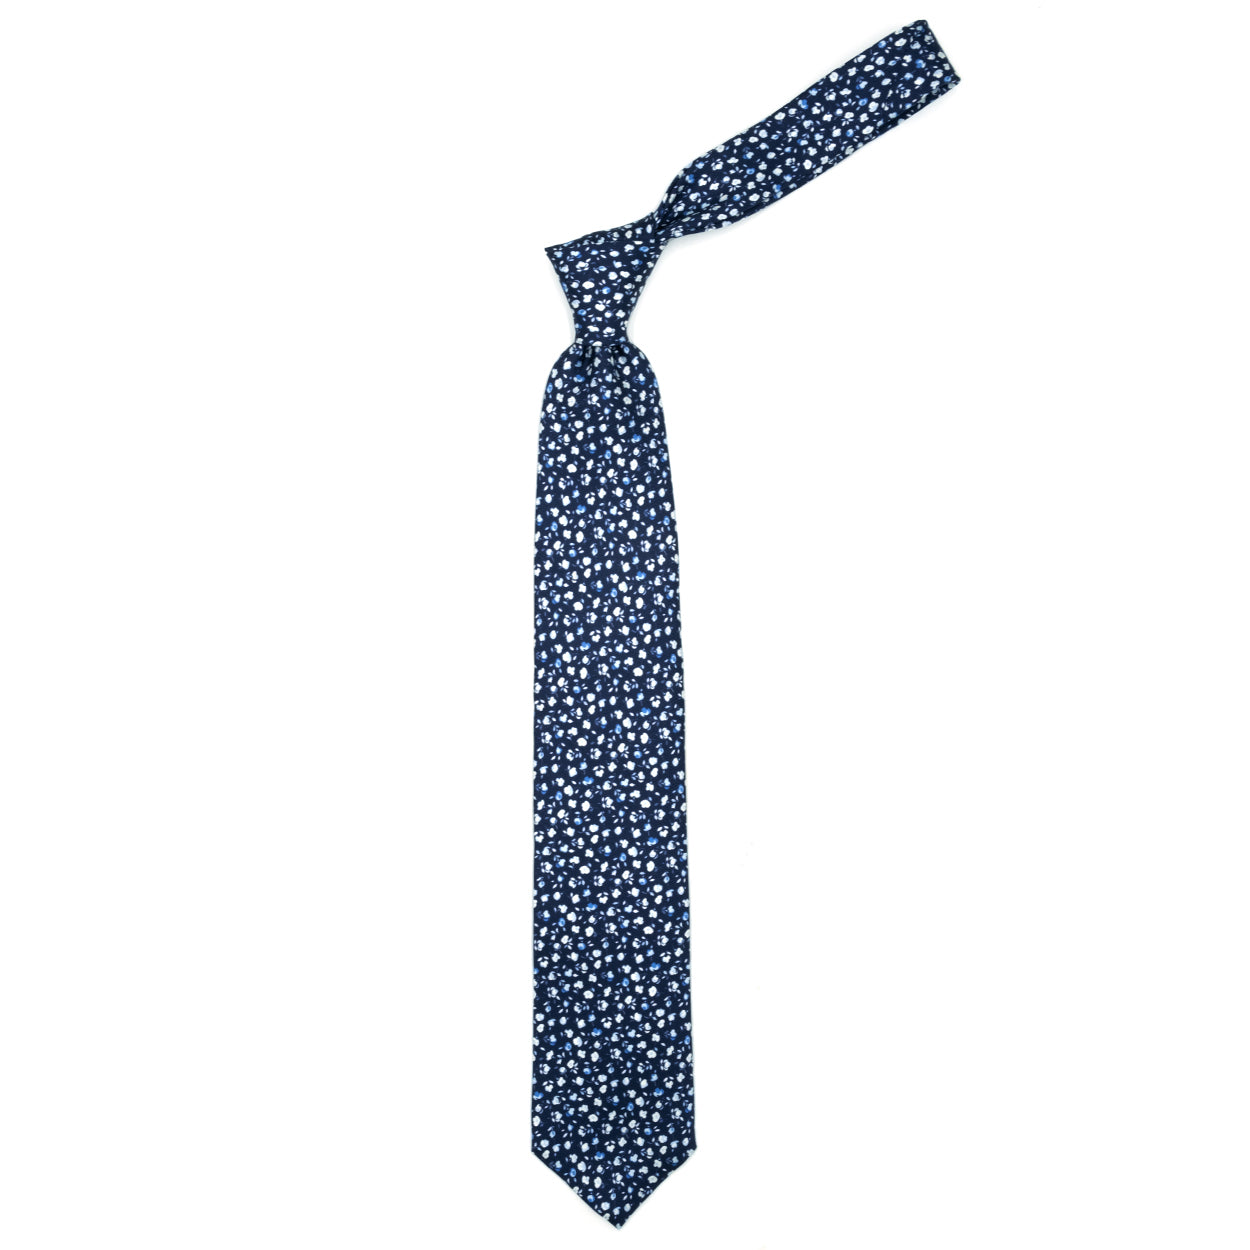 Blue tie with white flowers